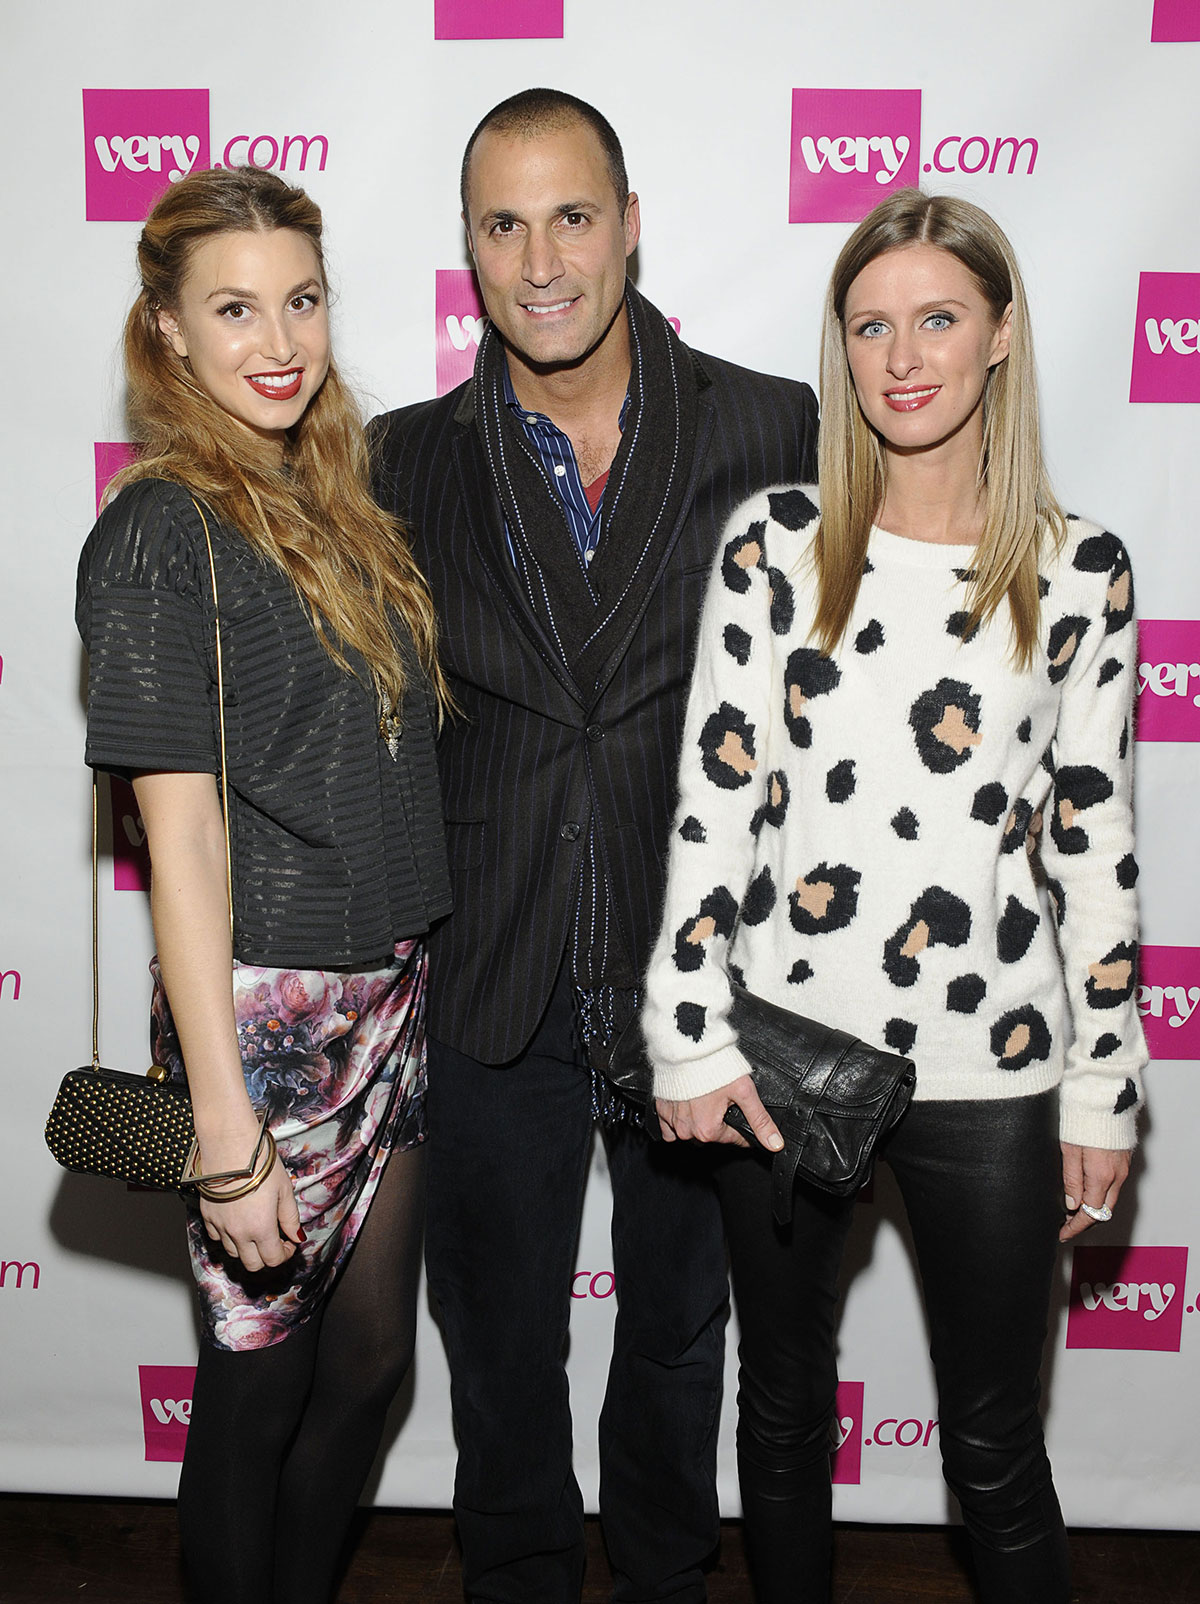 Nicky Hilton and Whitney Port launch event